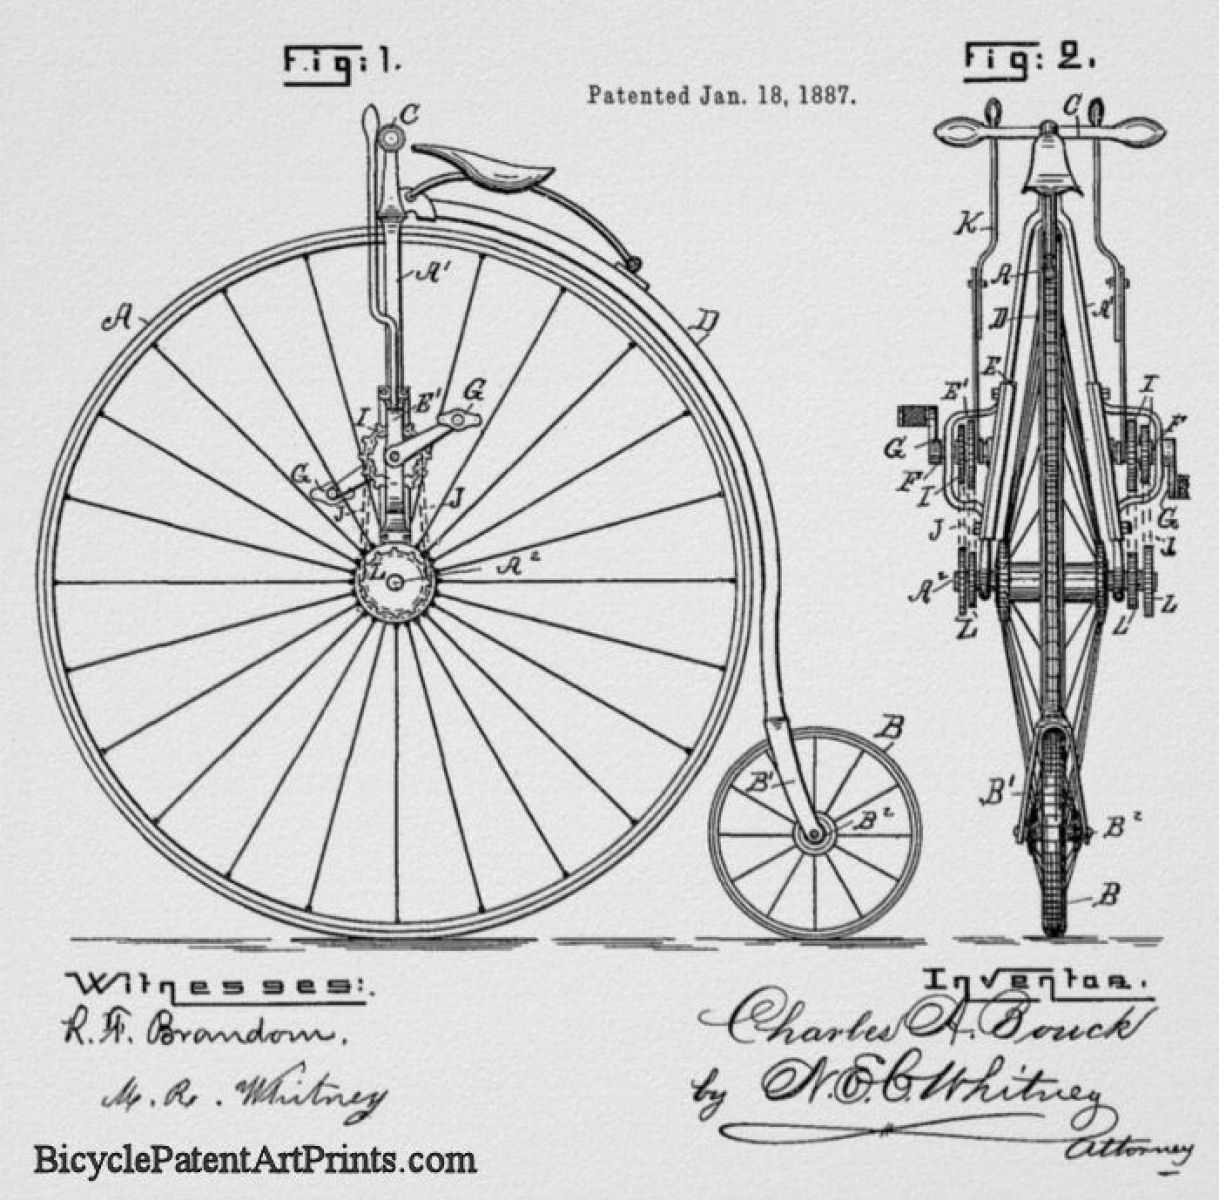 1887 Chain and gear drive bicycle patent drawing